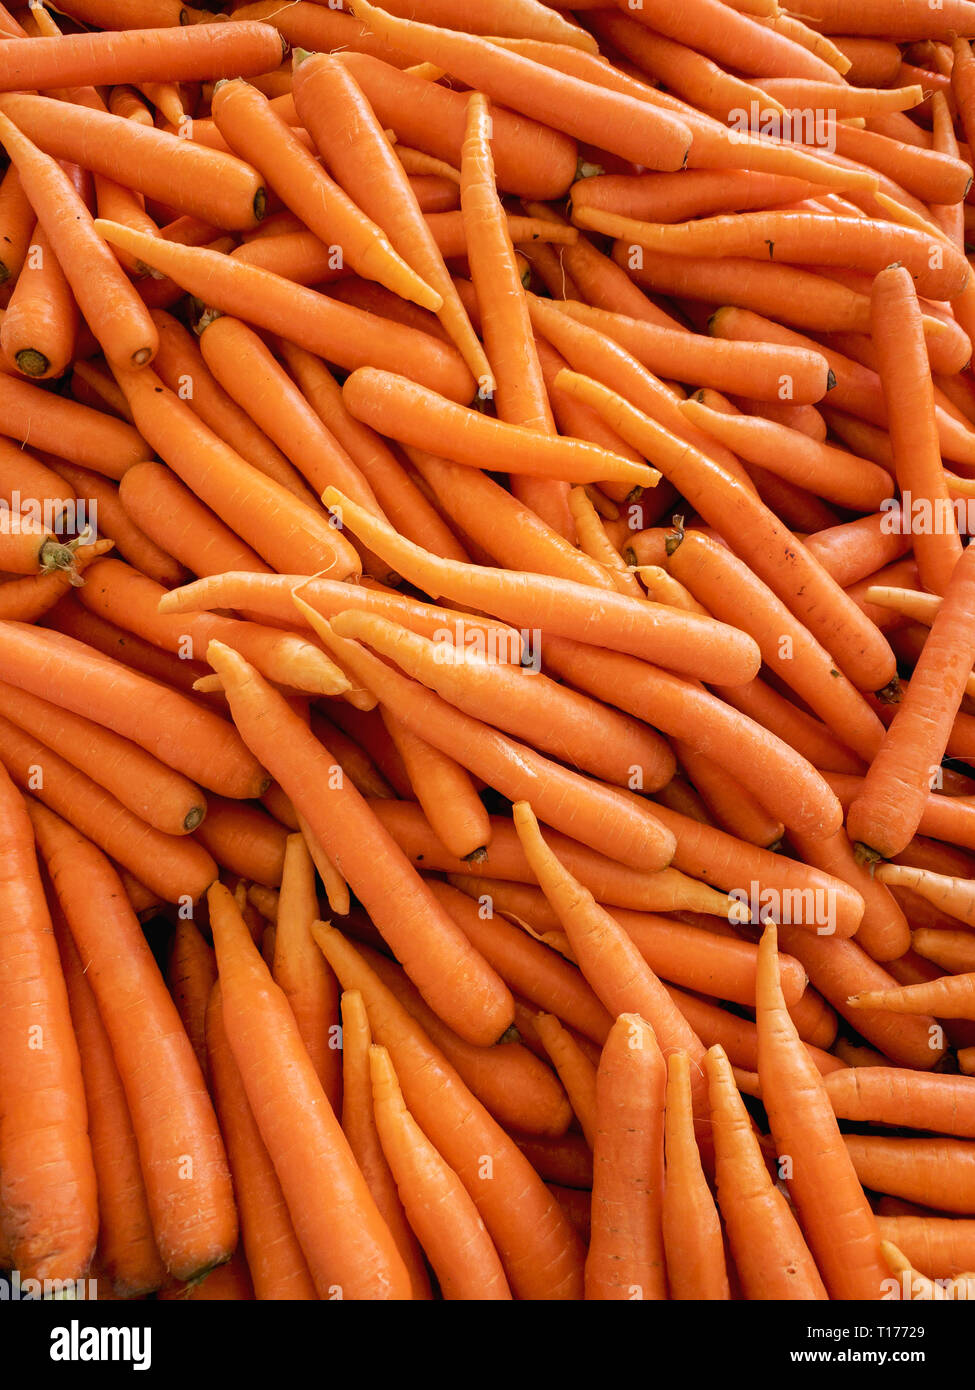 Top view of fresh carrots in the grocery store. Stock Photo